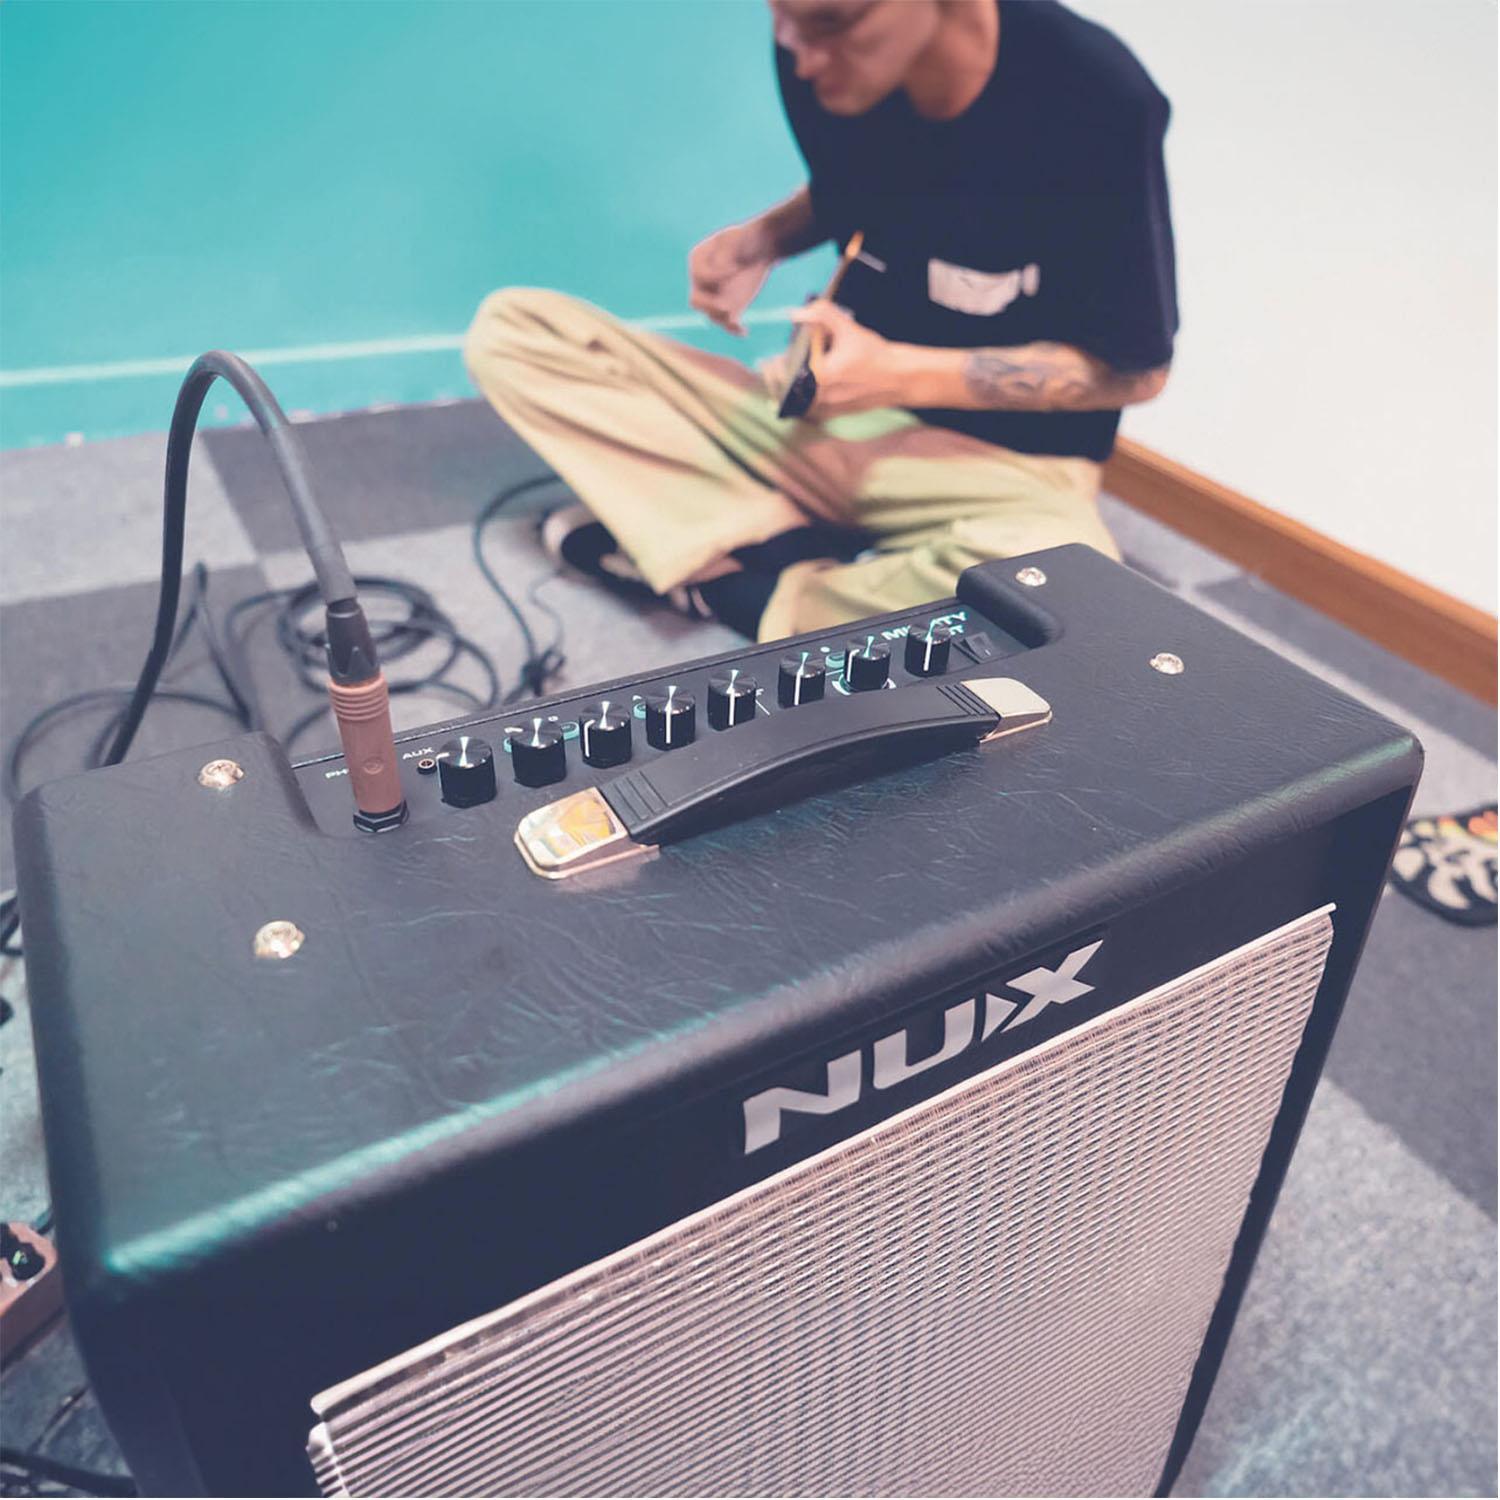 NUX Mighty 40BT 40W Guitar Amplifier with App and Bluetooth Control - DY Pro Audio